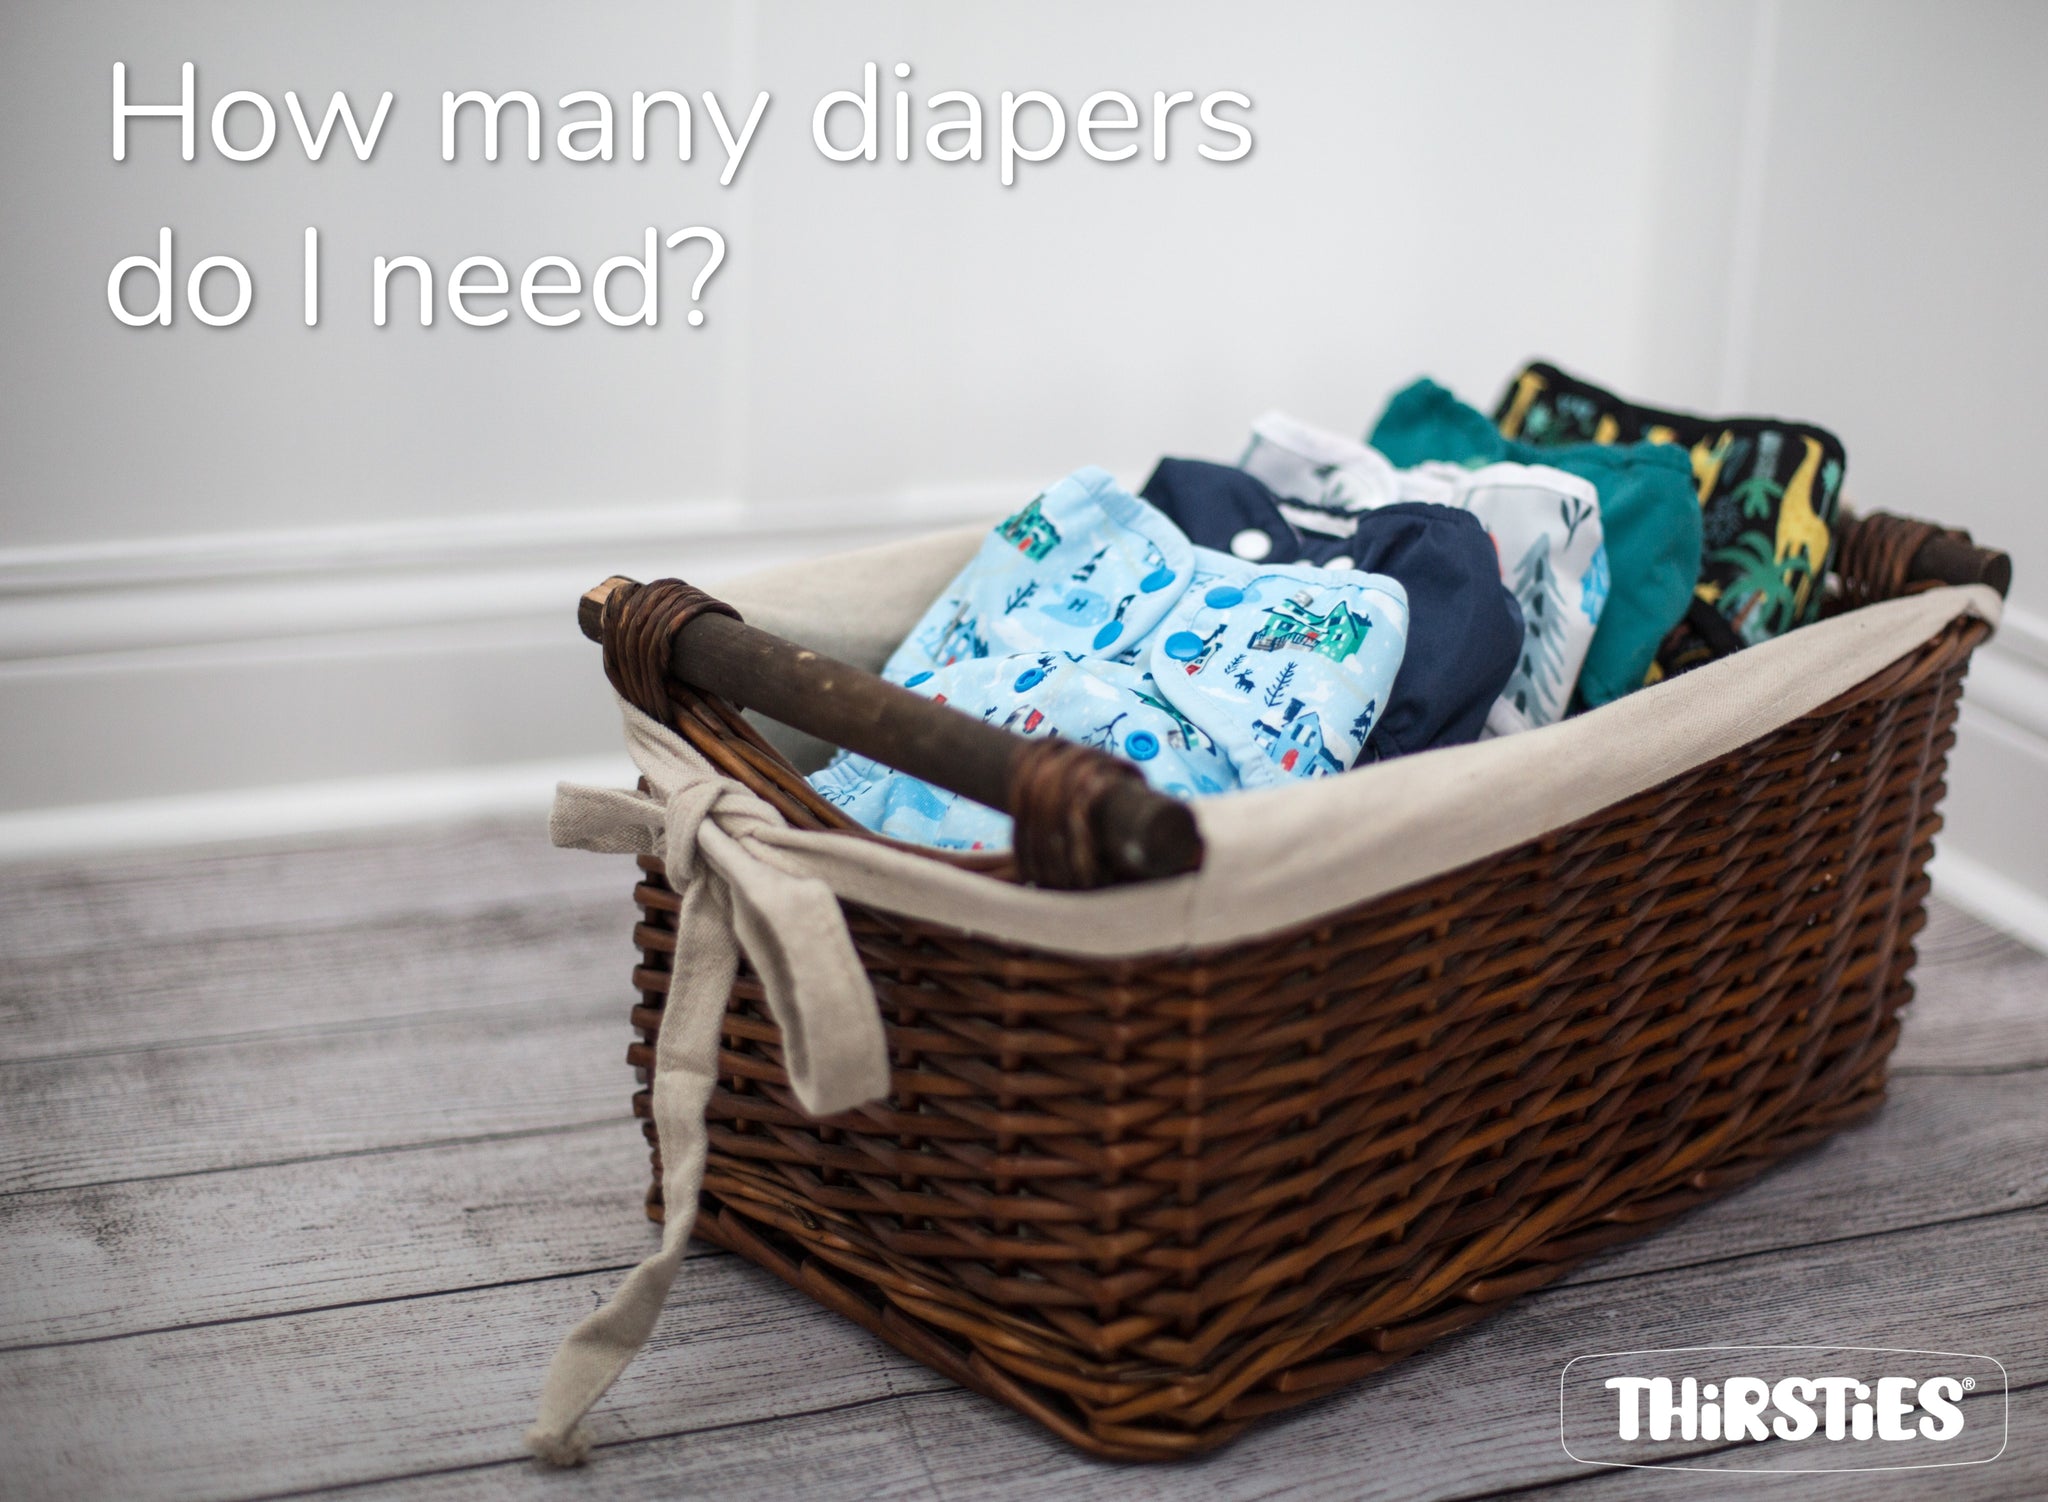 image of diapers in a basket